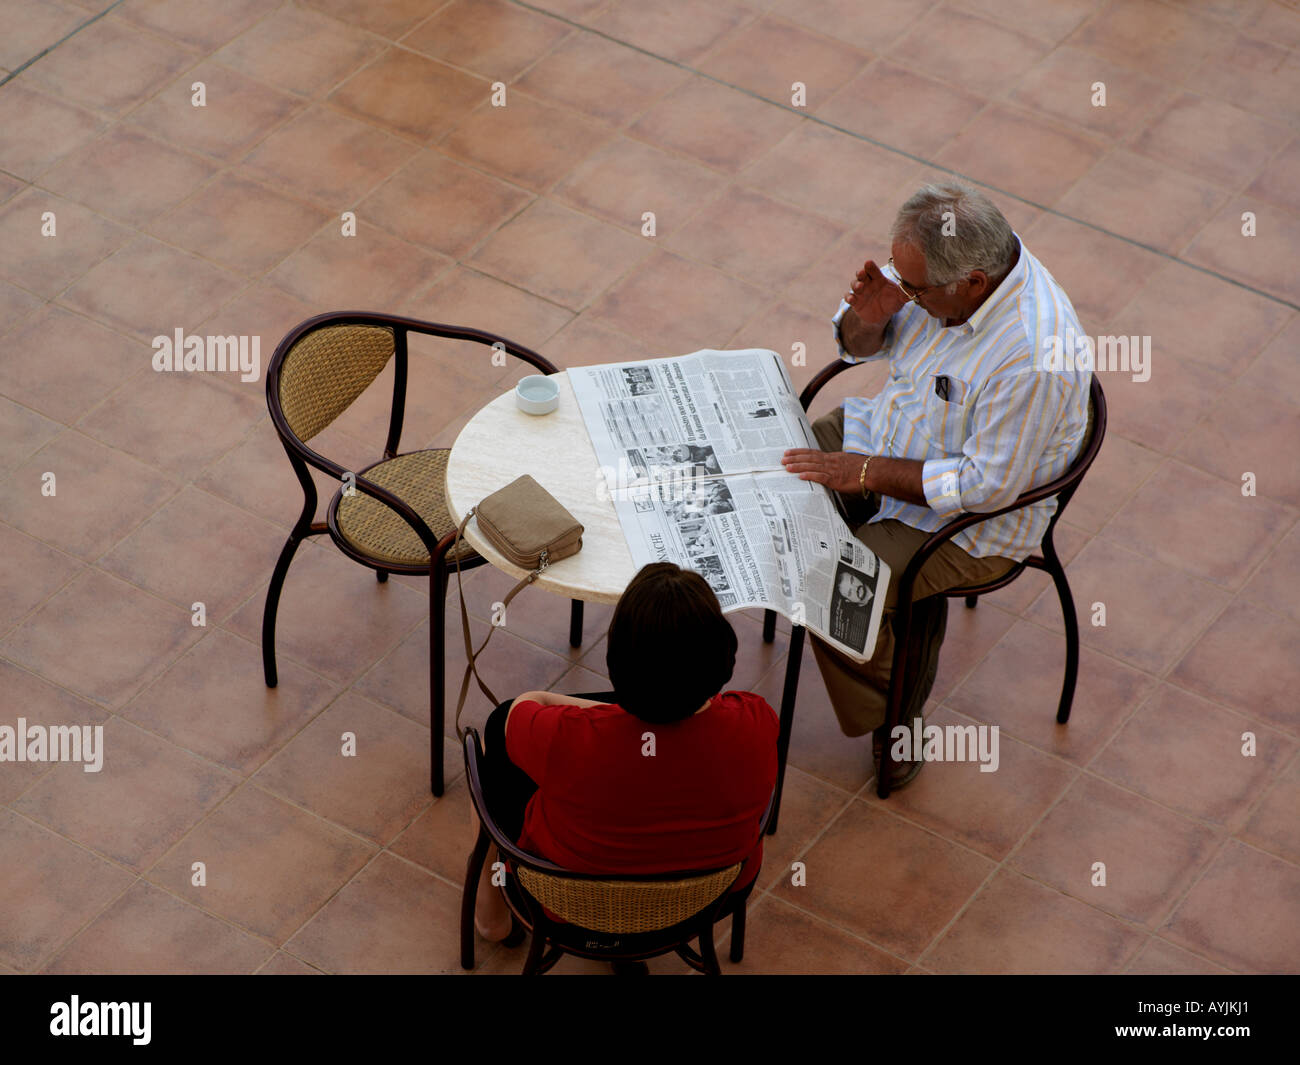 Palermo Sicily Italy Genoardo Park Hotel Reading Newspaper on Terrace Couple Sitting at Table Stock Photo